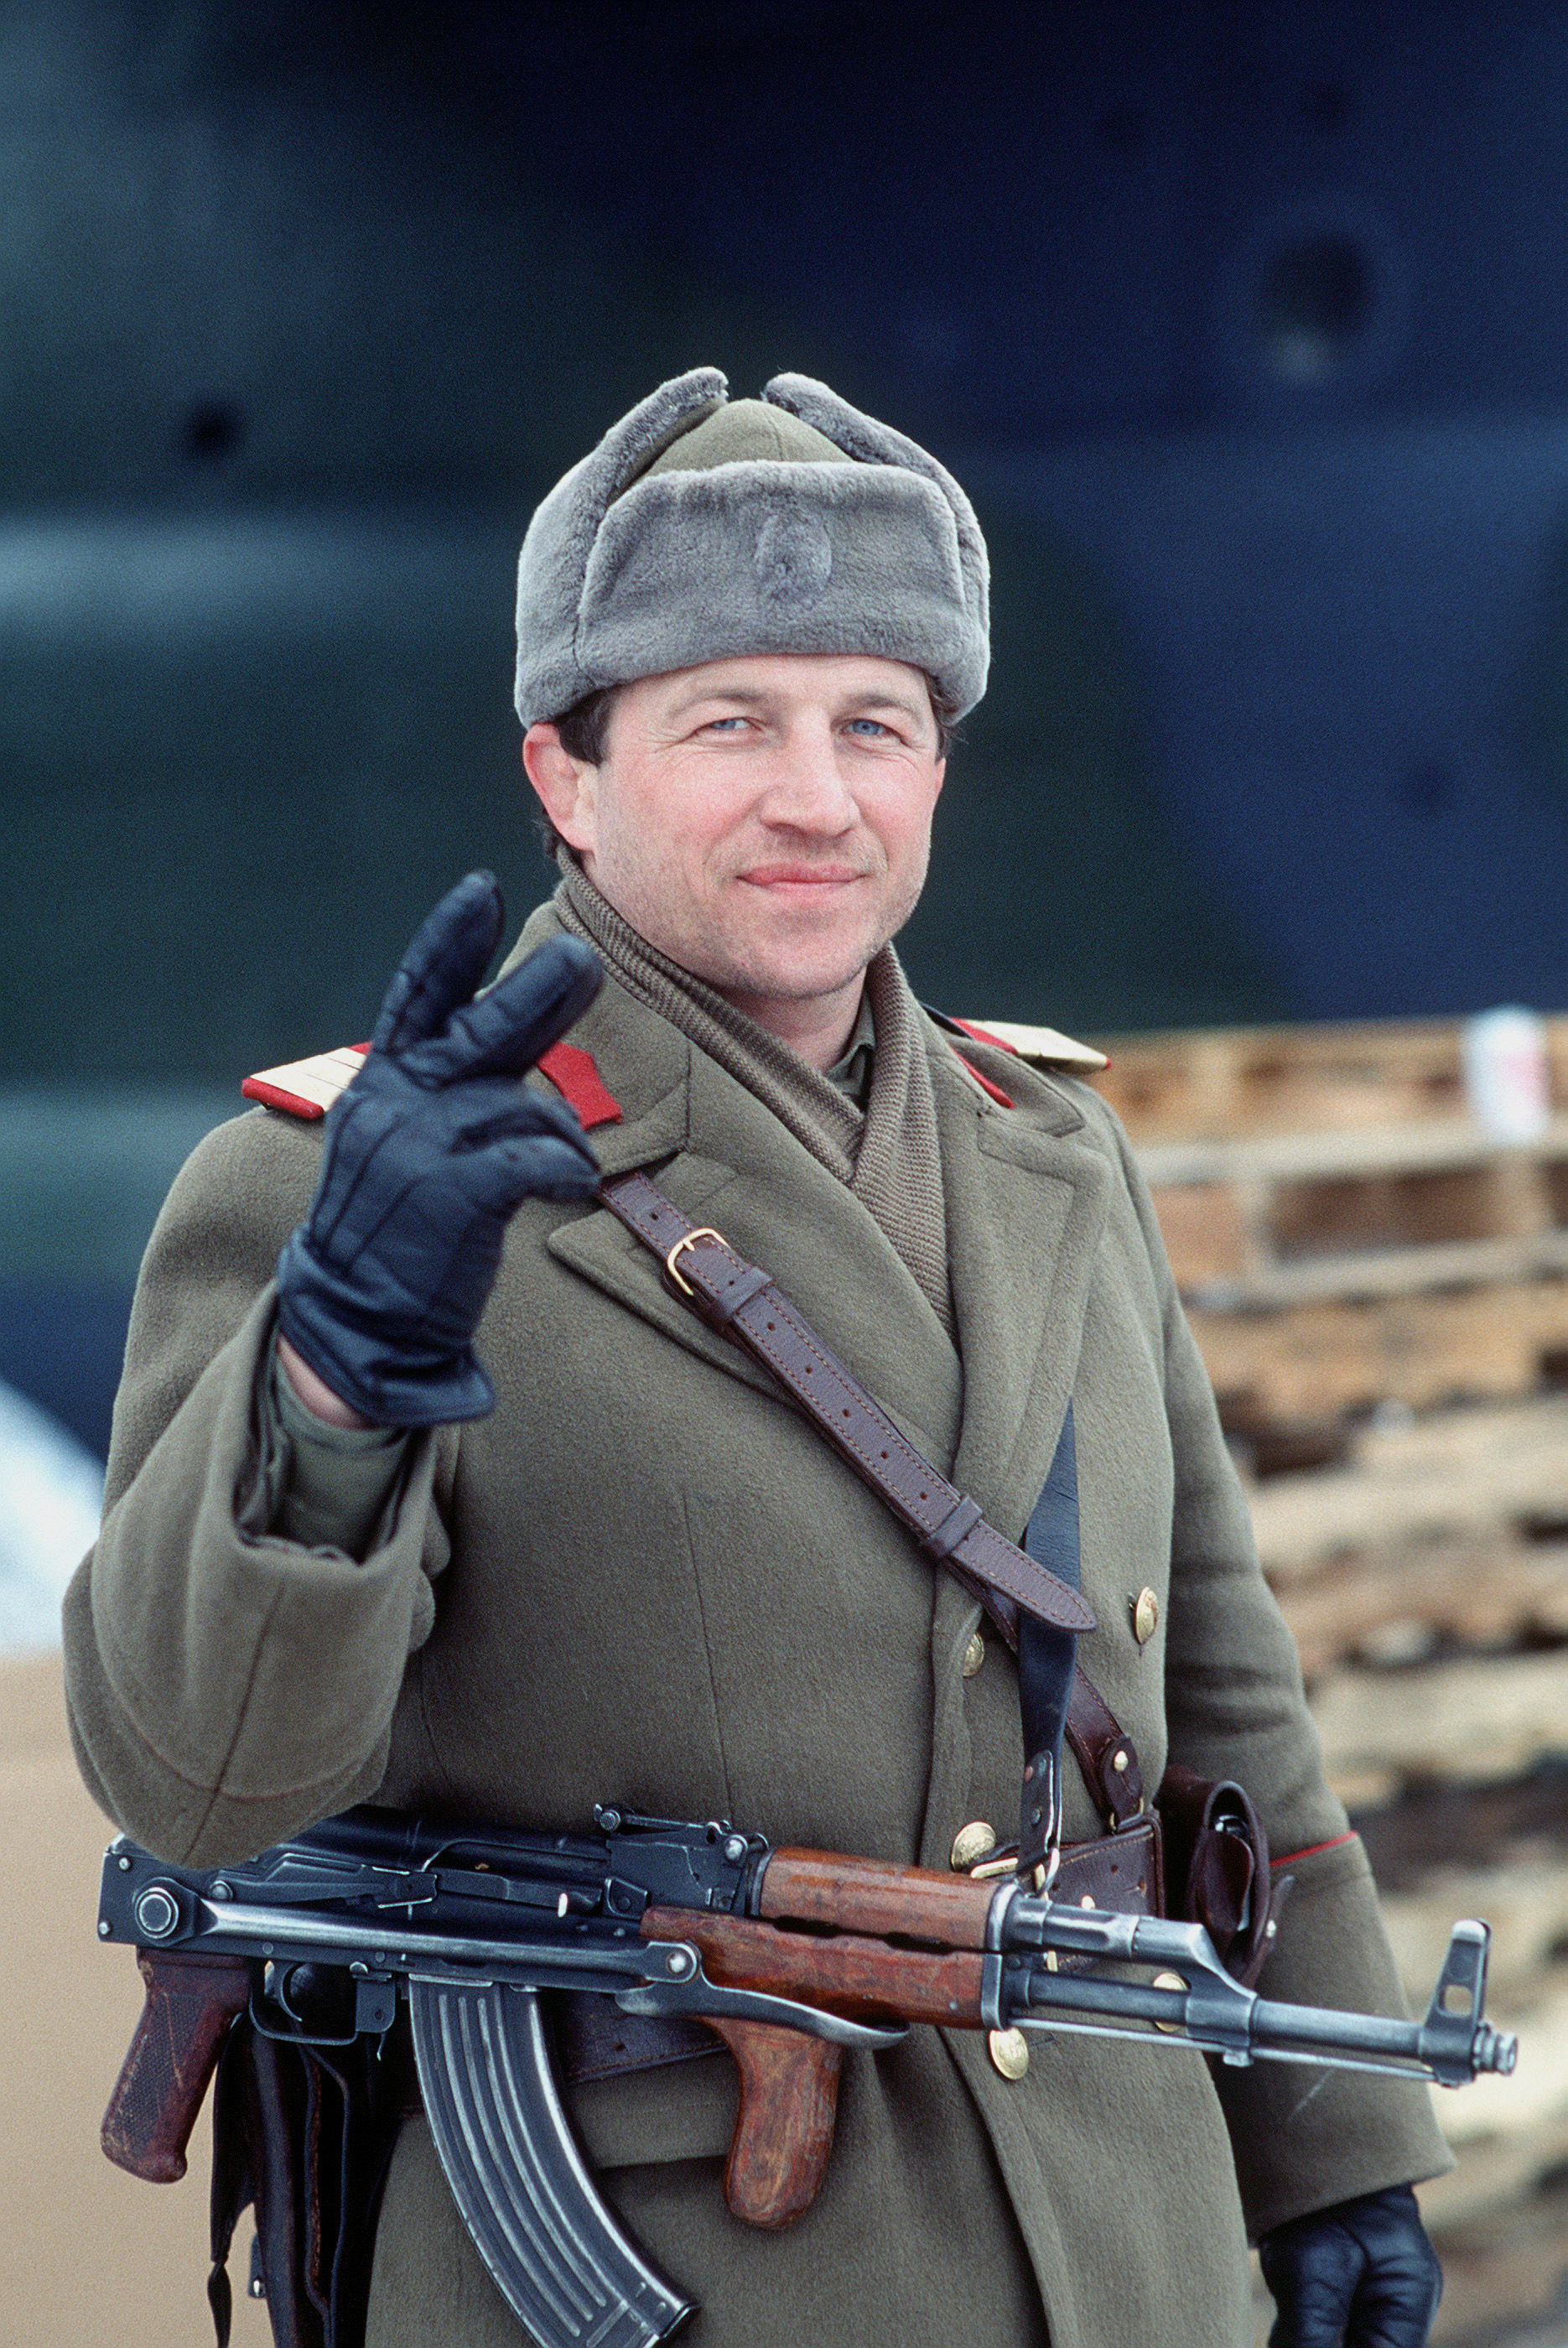 A Romanian sub-officer gives the victory sign on New Years Eve 1989. He has removed the insignia of communist Romania from his headwear. Source: Wikimedia / https://research.archives.gov/id/6472645